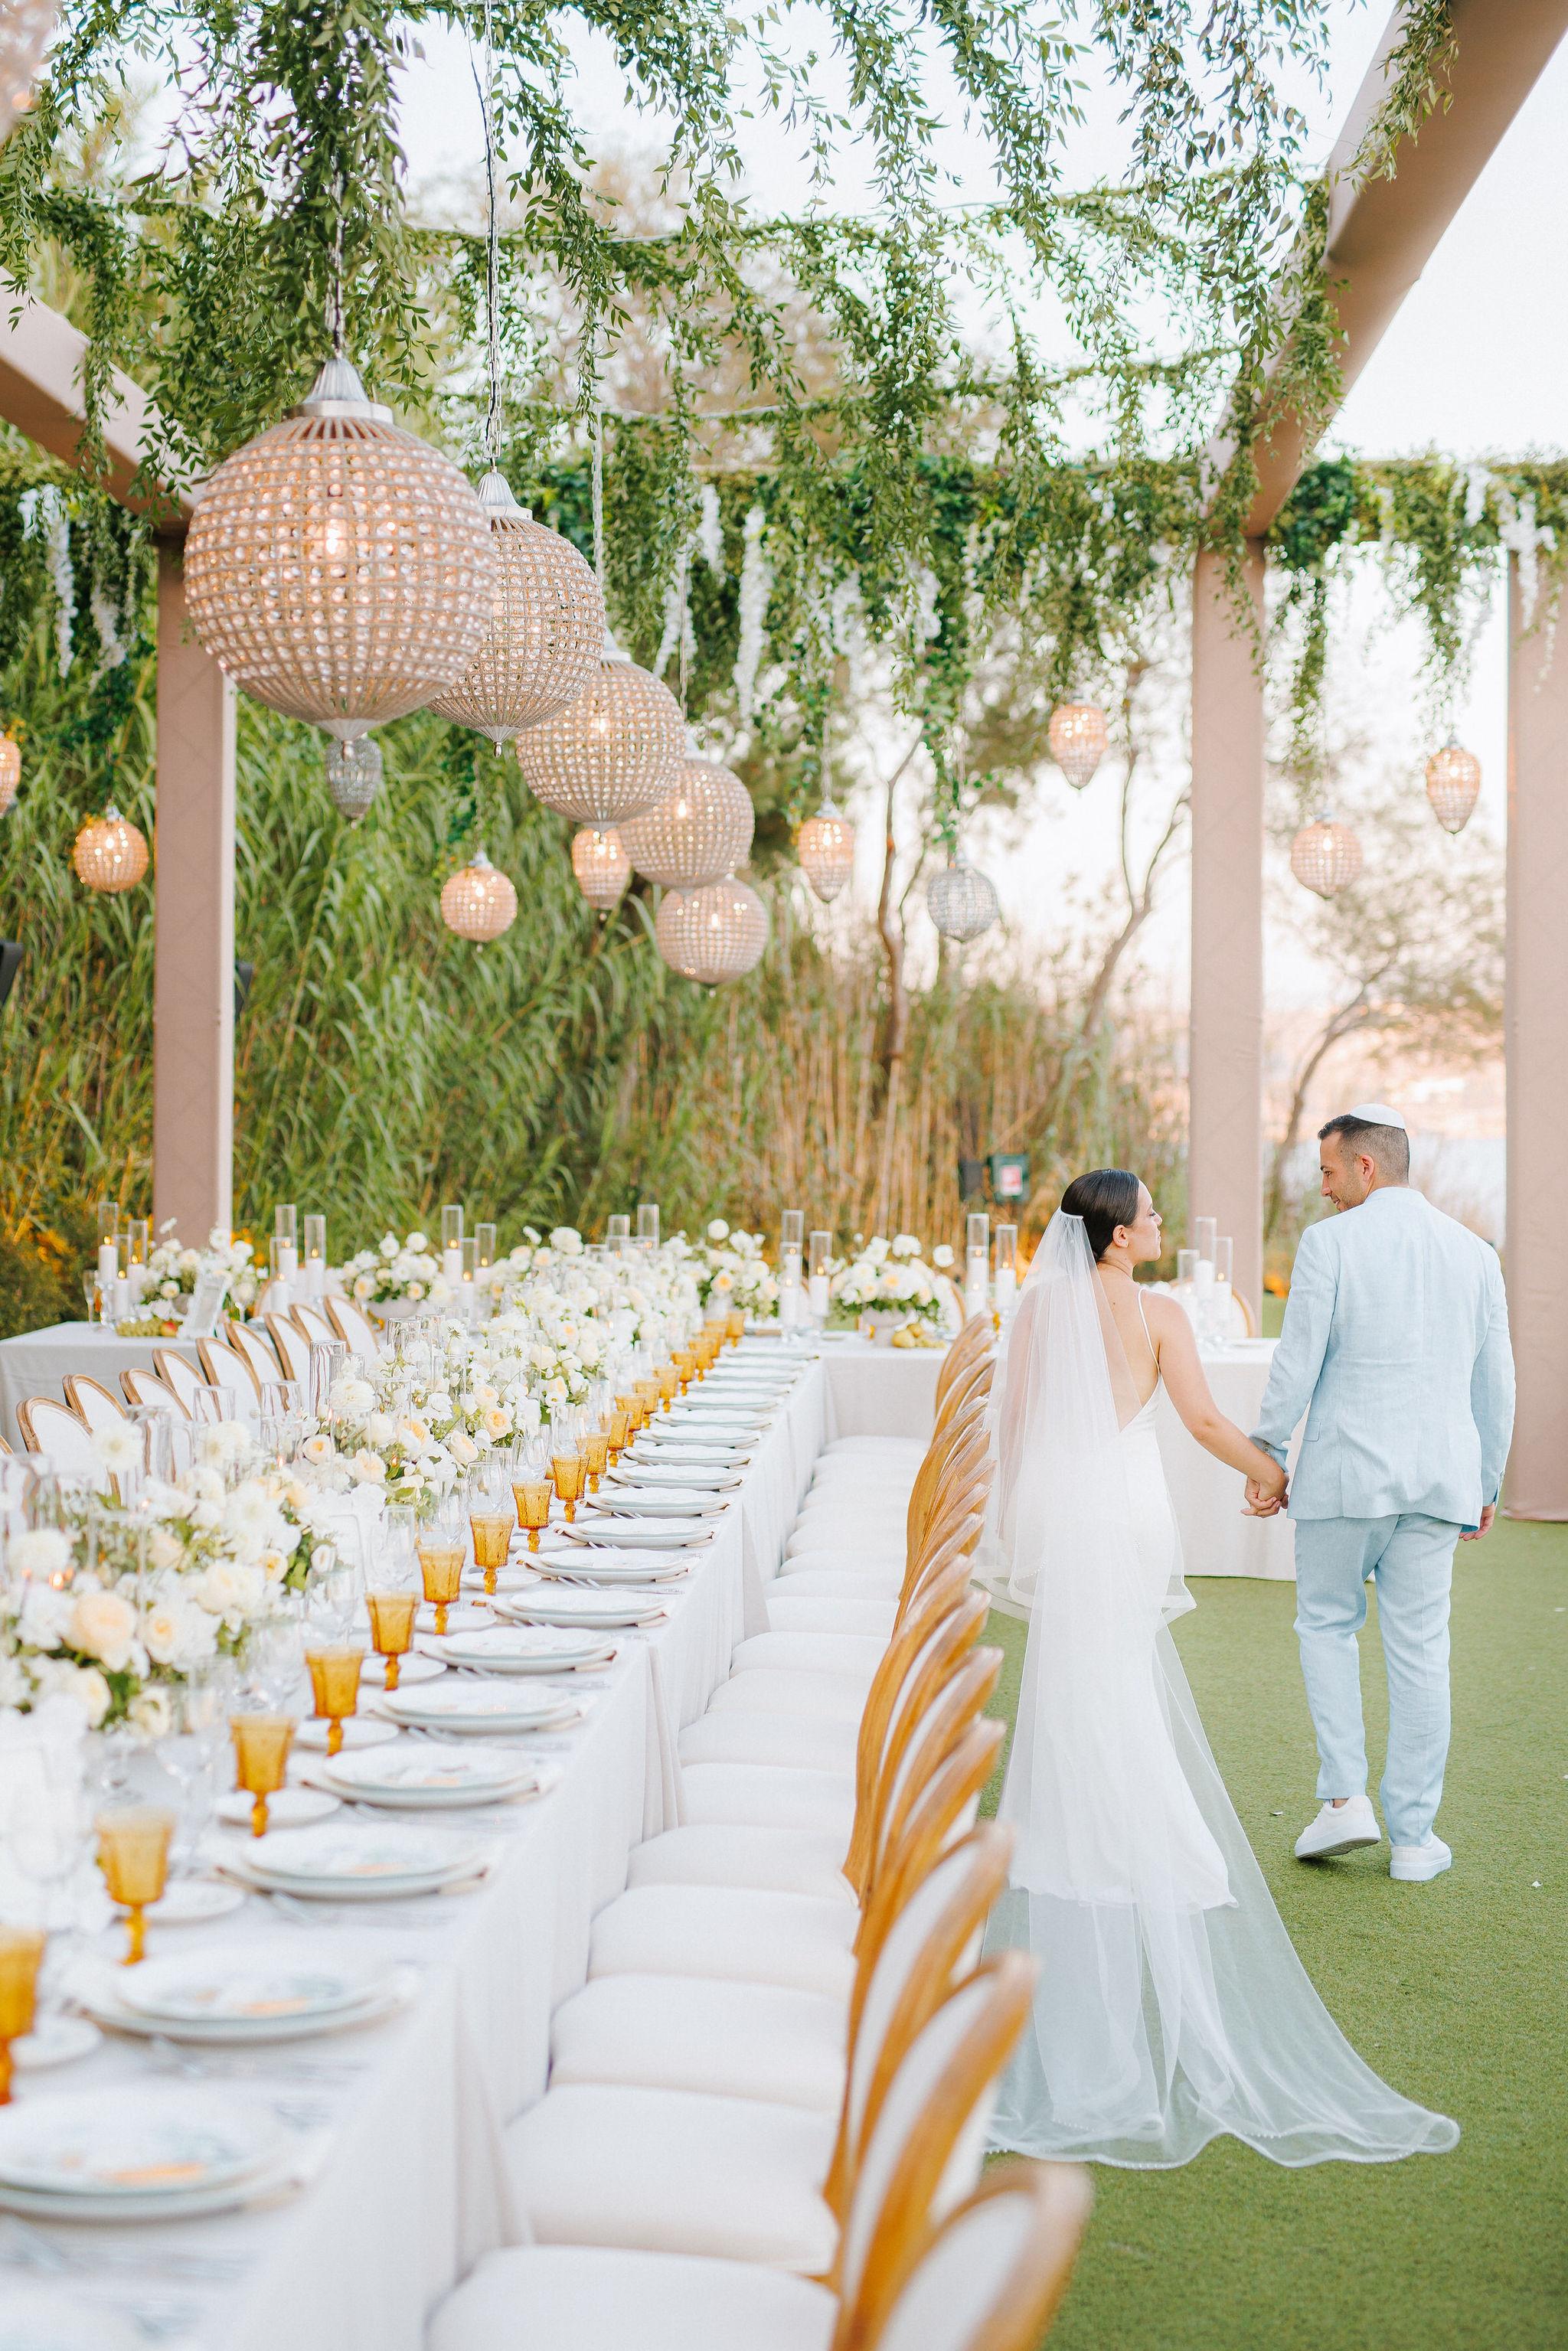 A Garden seaside wedding at Island Art and Taste on The Athens Riviera designed by luxury wedding planners, Riviera Blu Events